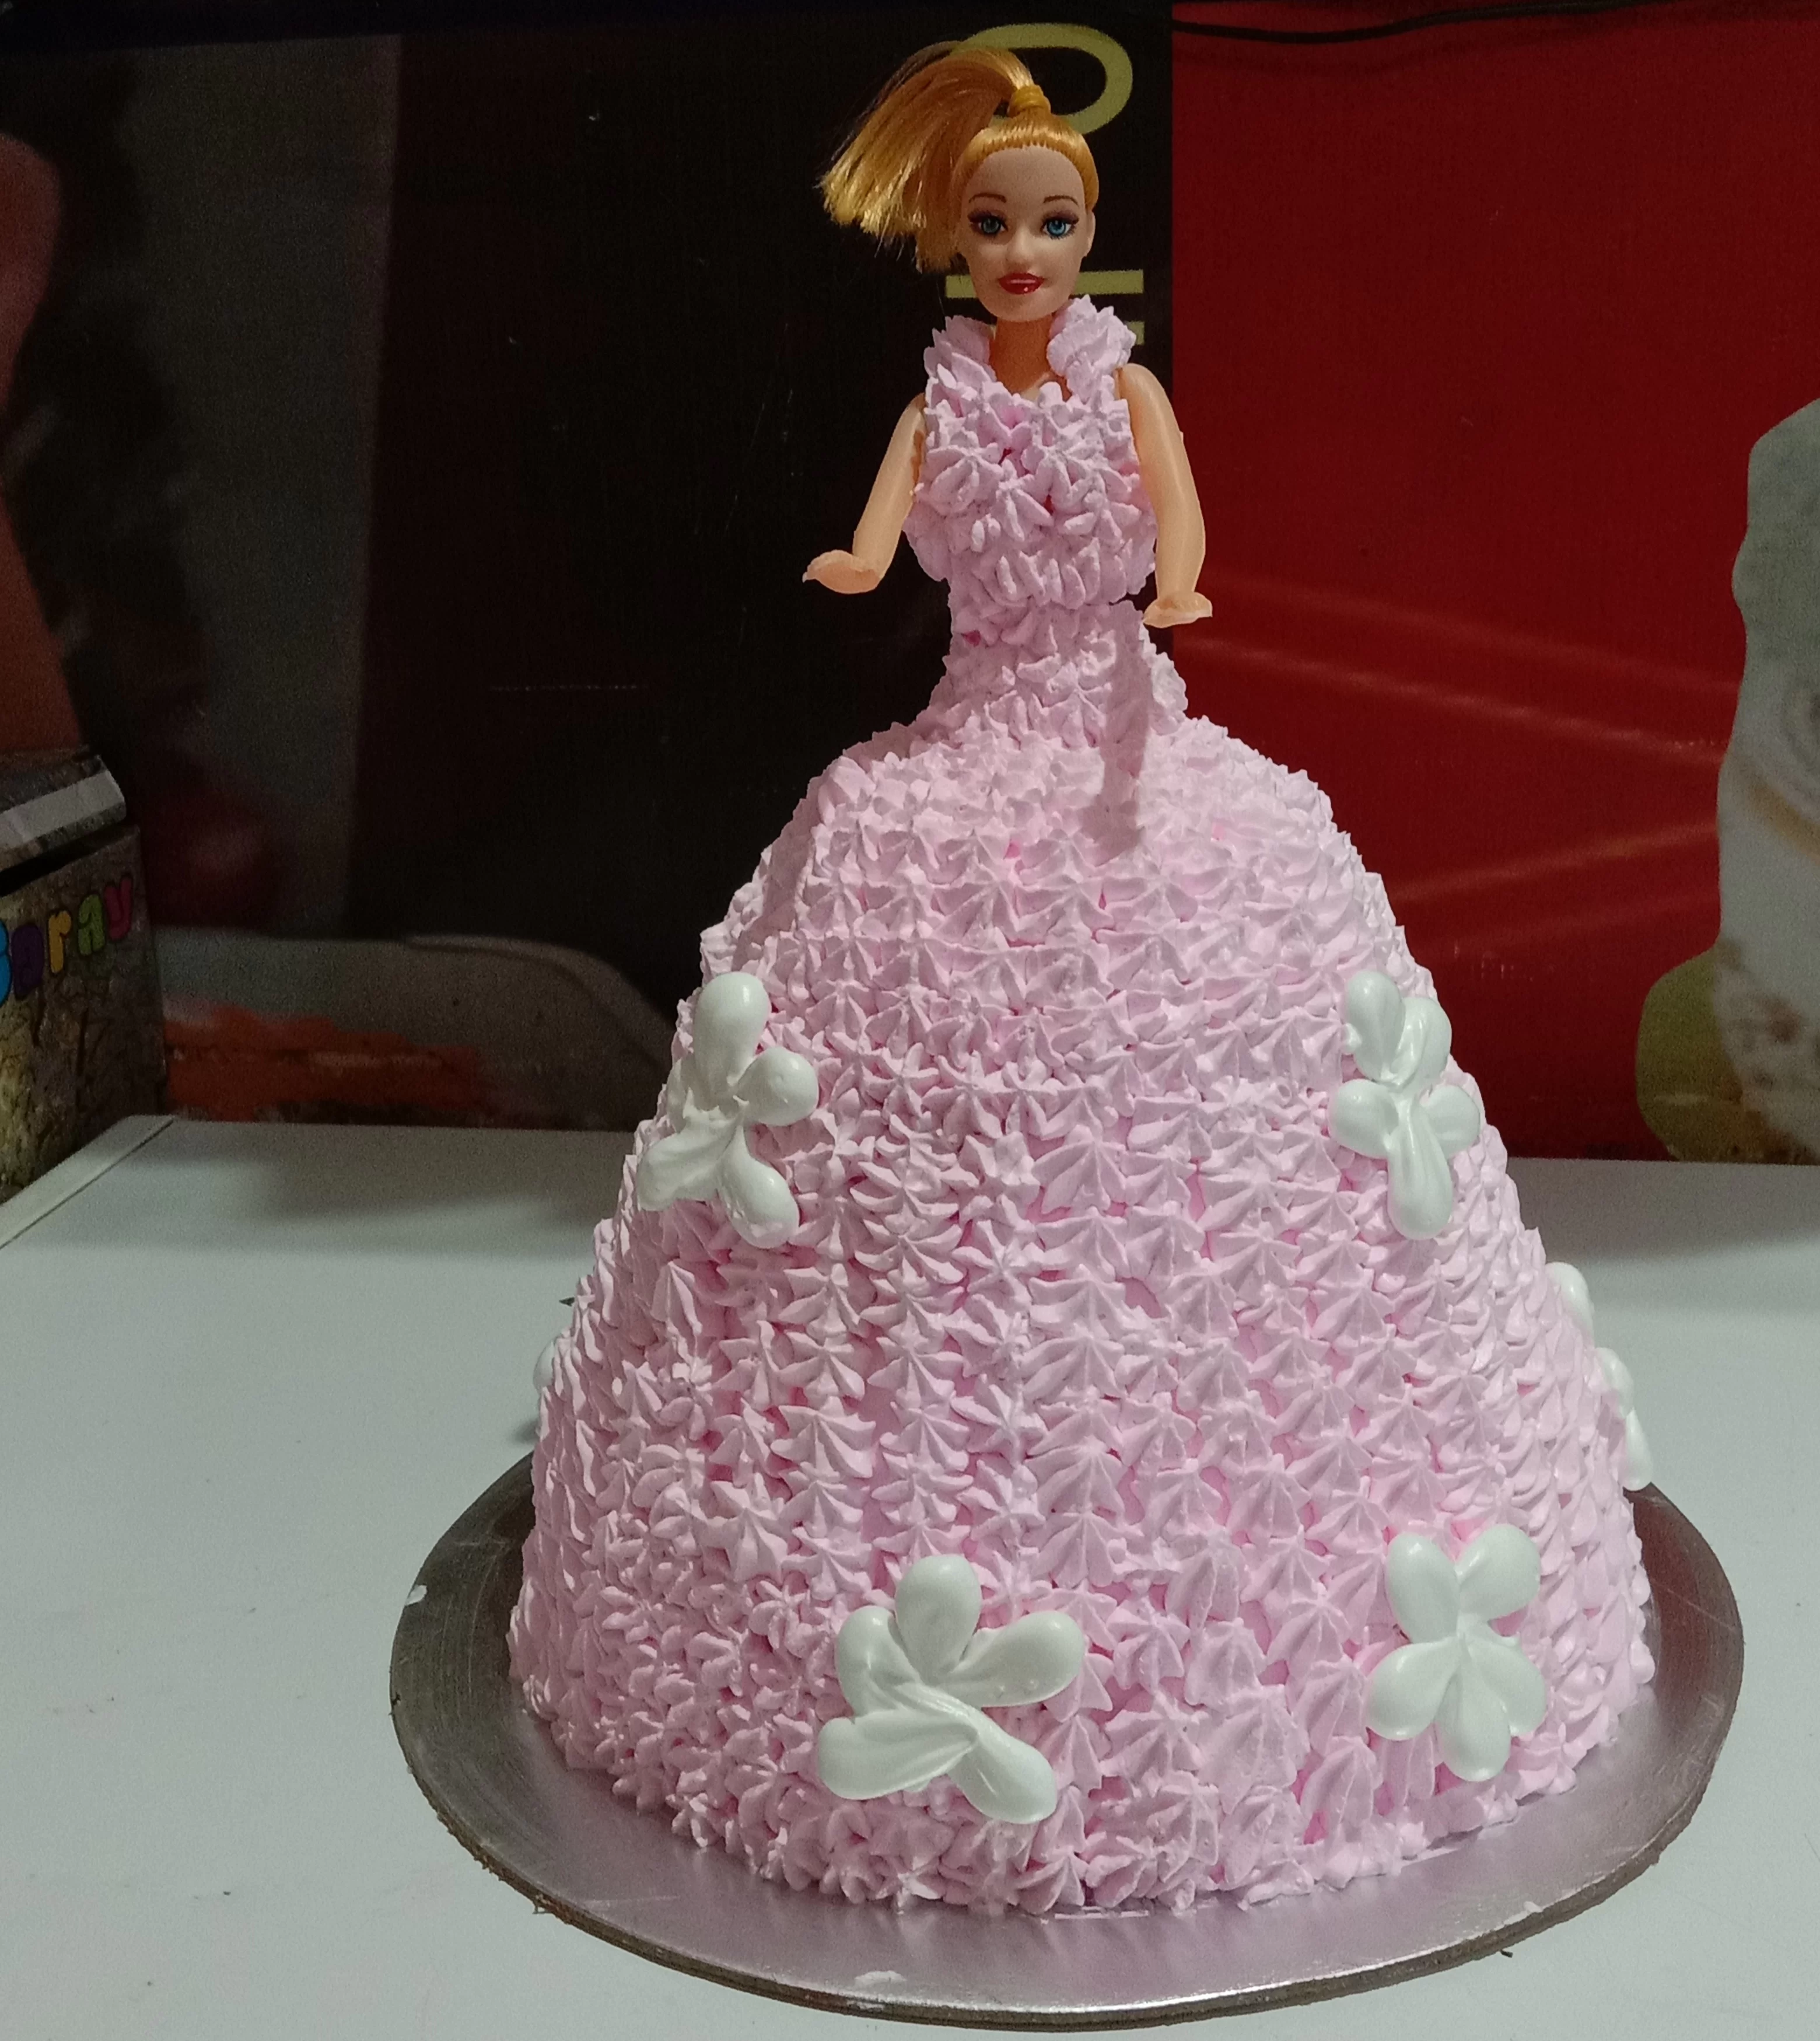 Blueberry Doll Cake – Magic Bakers, Delicious Cakes